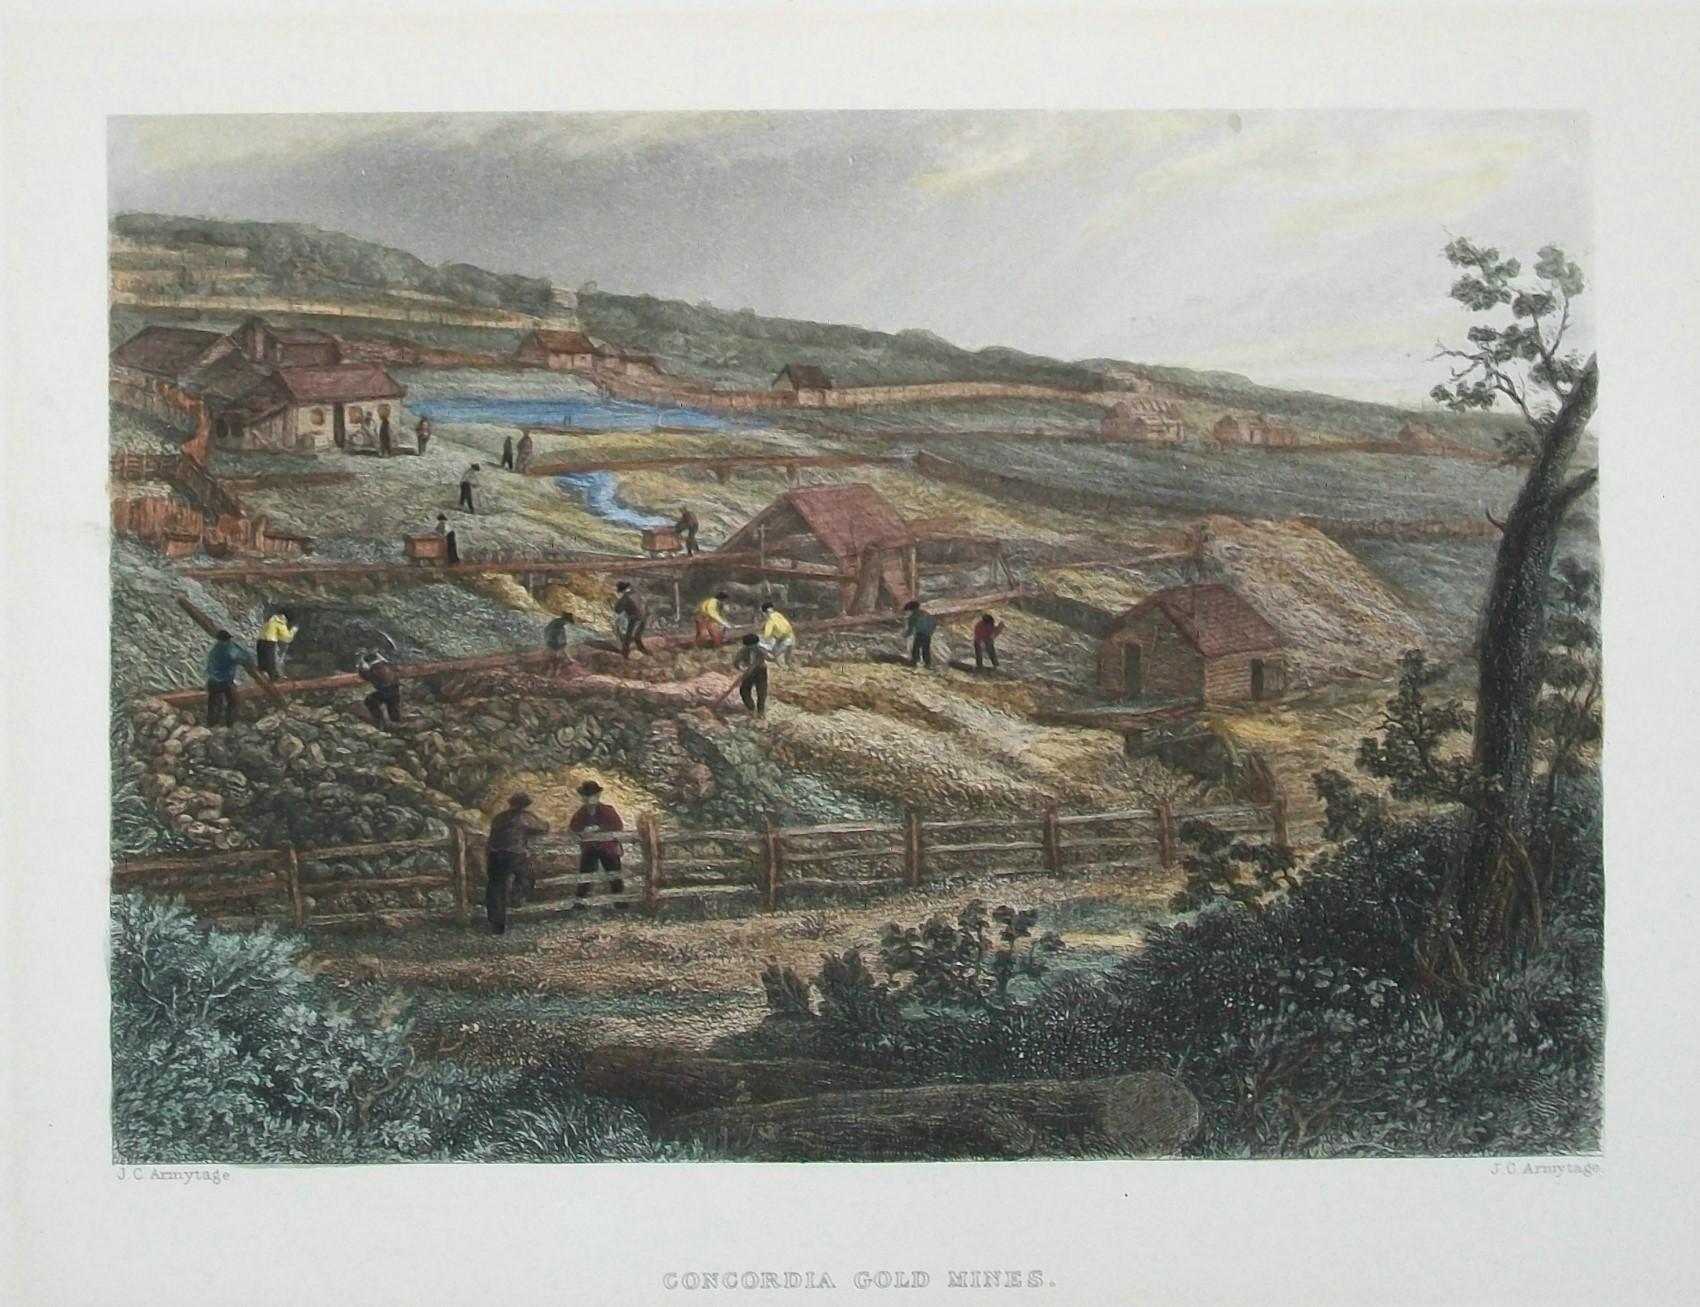 JAMES CHARLES ARMYTAGE (1820-1897) - 'Concordia Gold Mines' - Antique steel plate engraving from 'Australia' by Edwin Carton Booth - hand colored - titled lower center - signed lower right - United Kingdom - circa 1874.

Excellent antique